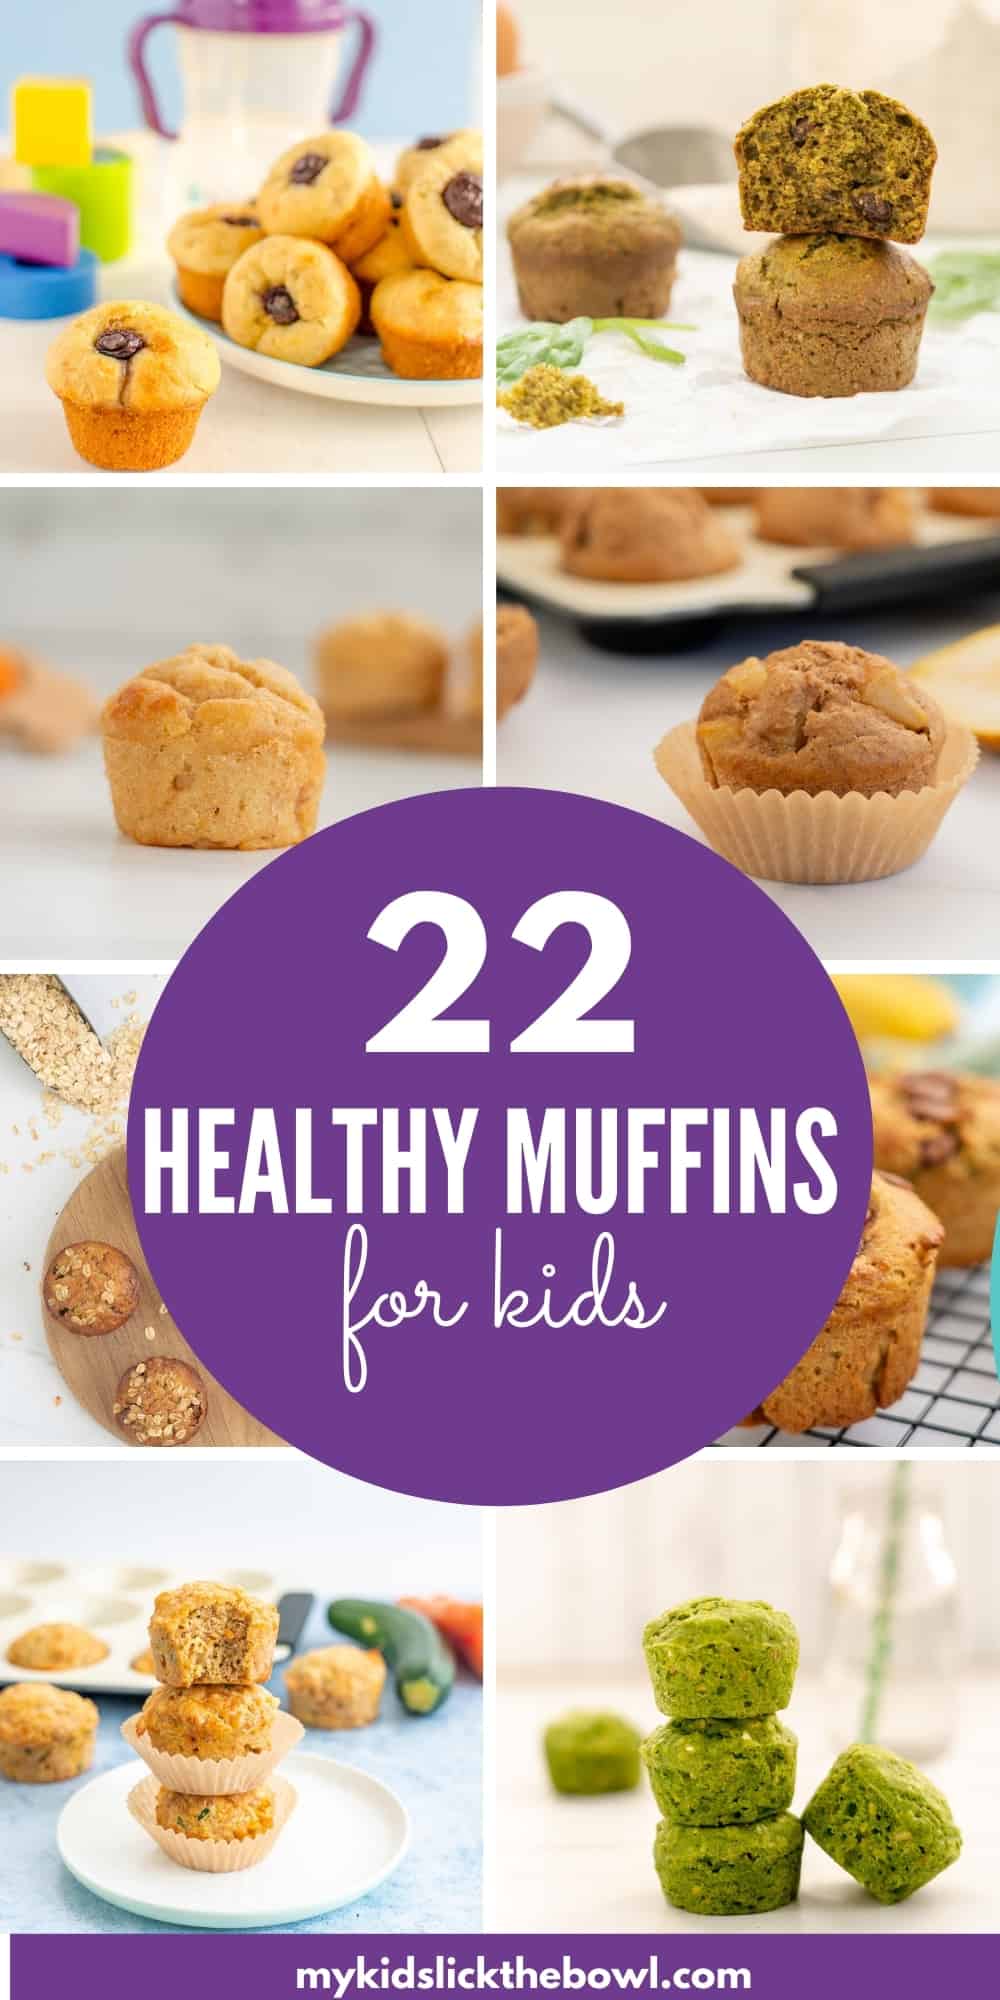 8 image collage of healthy muffins for kids with text overlay